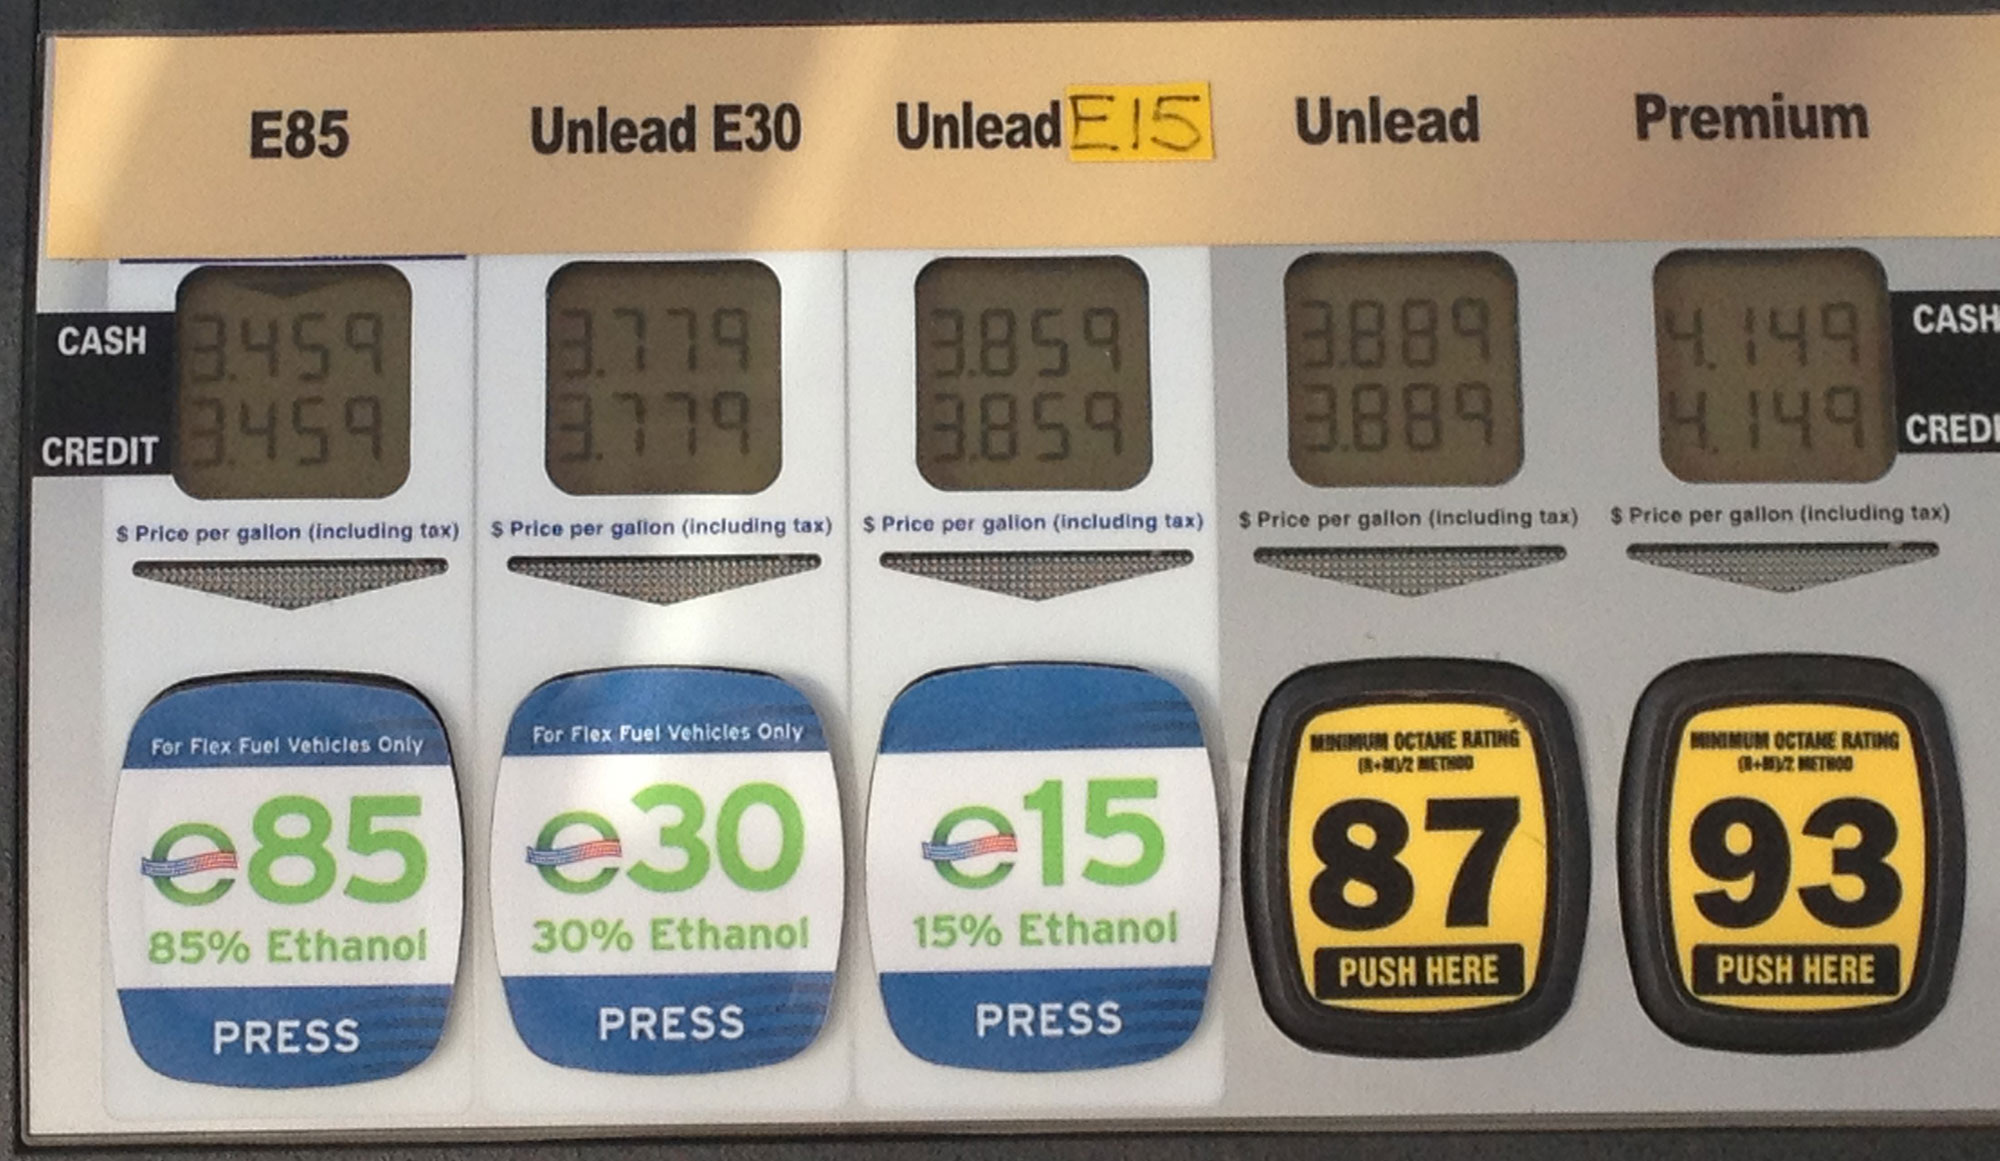 Photograph of fuel selection buttons on a gas pump. The options are E85 (85% ethanol), E30 (30% ethanol), E15 (15% ethanol), unleaded, and premium.